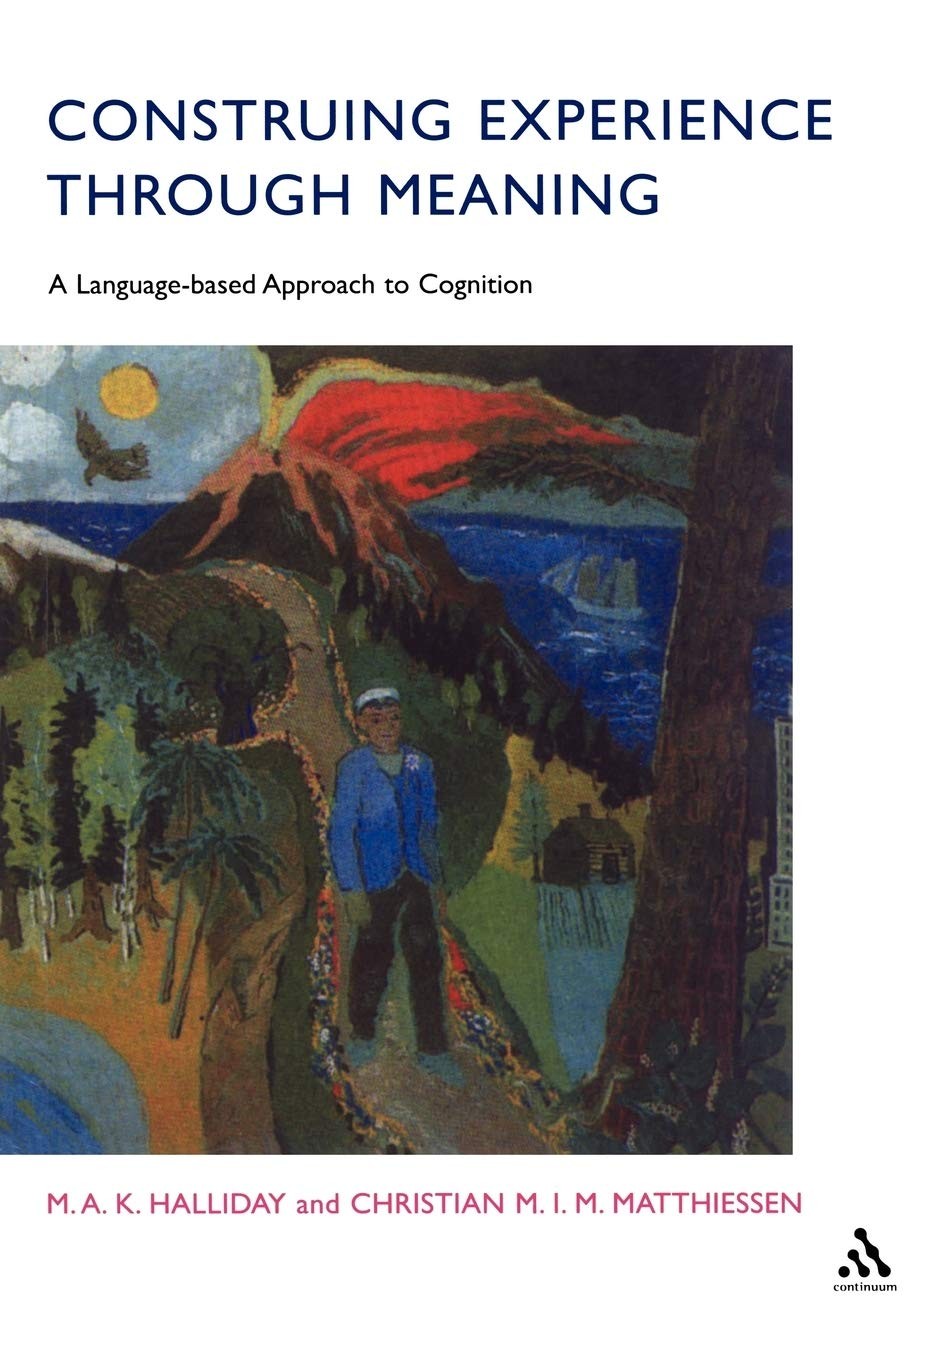 Construing Experience Through Meaning: A Language-Based Approach to Cognition